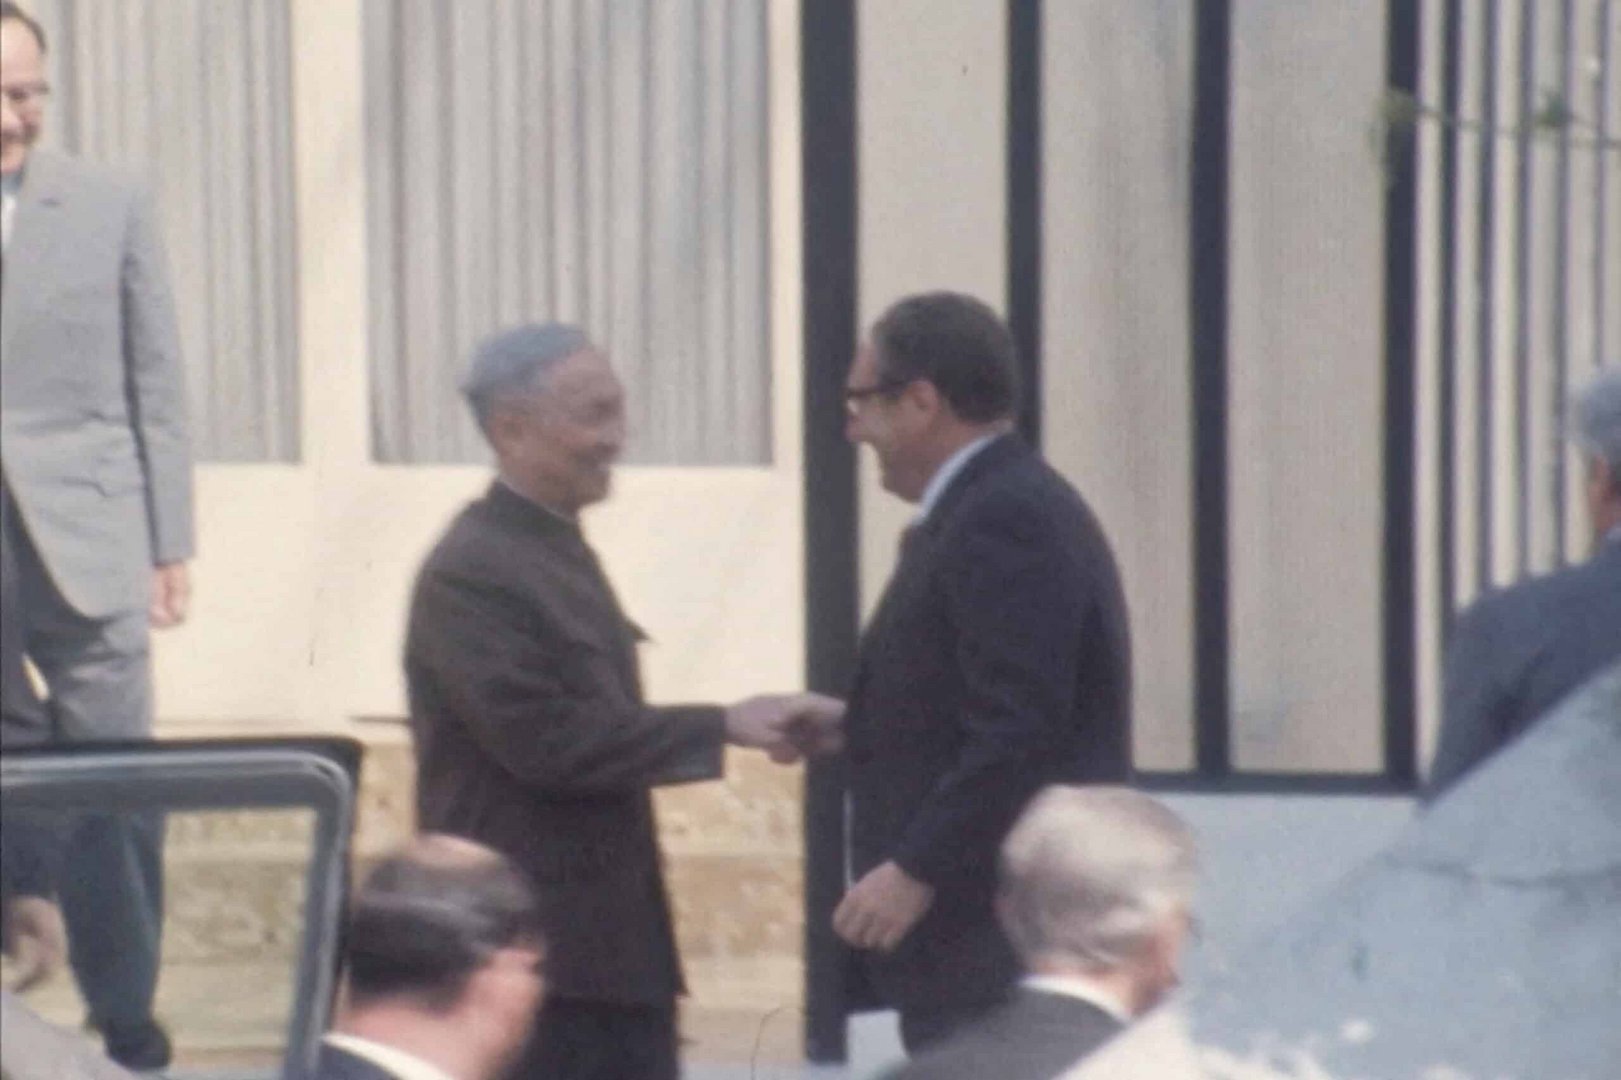 file photo: u.s. national security adviser henry kissinger shakes hands with north vietnamese politburo member le duc tho ahead of talks on the war in vietnam, in saint nom la breteche